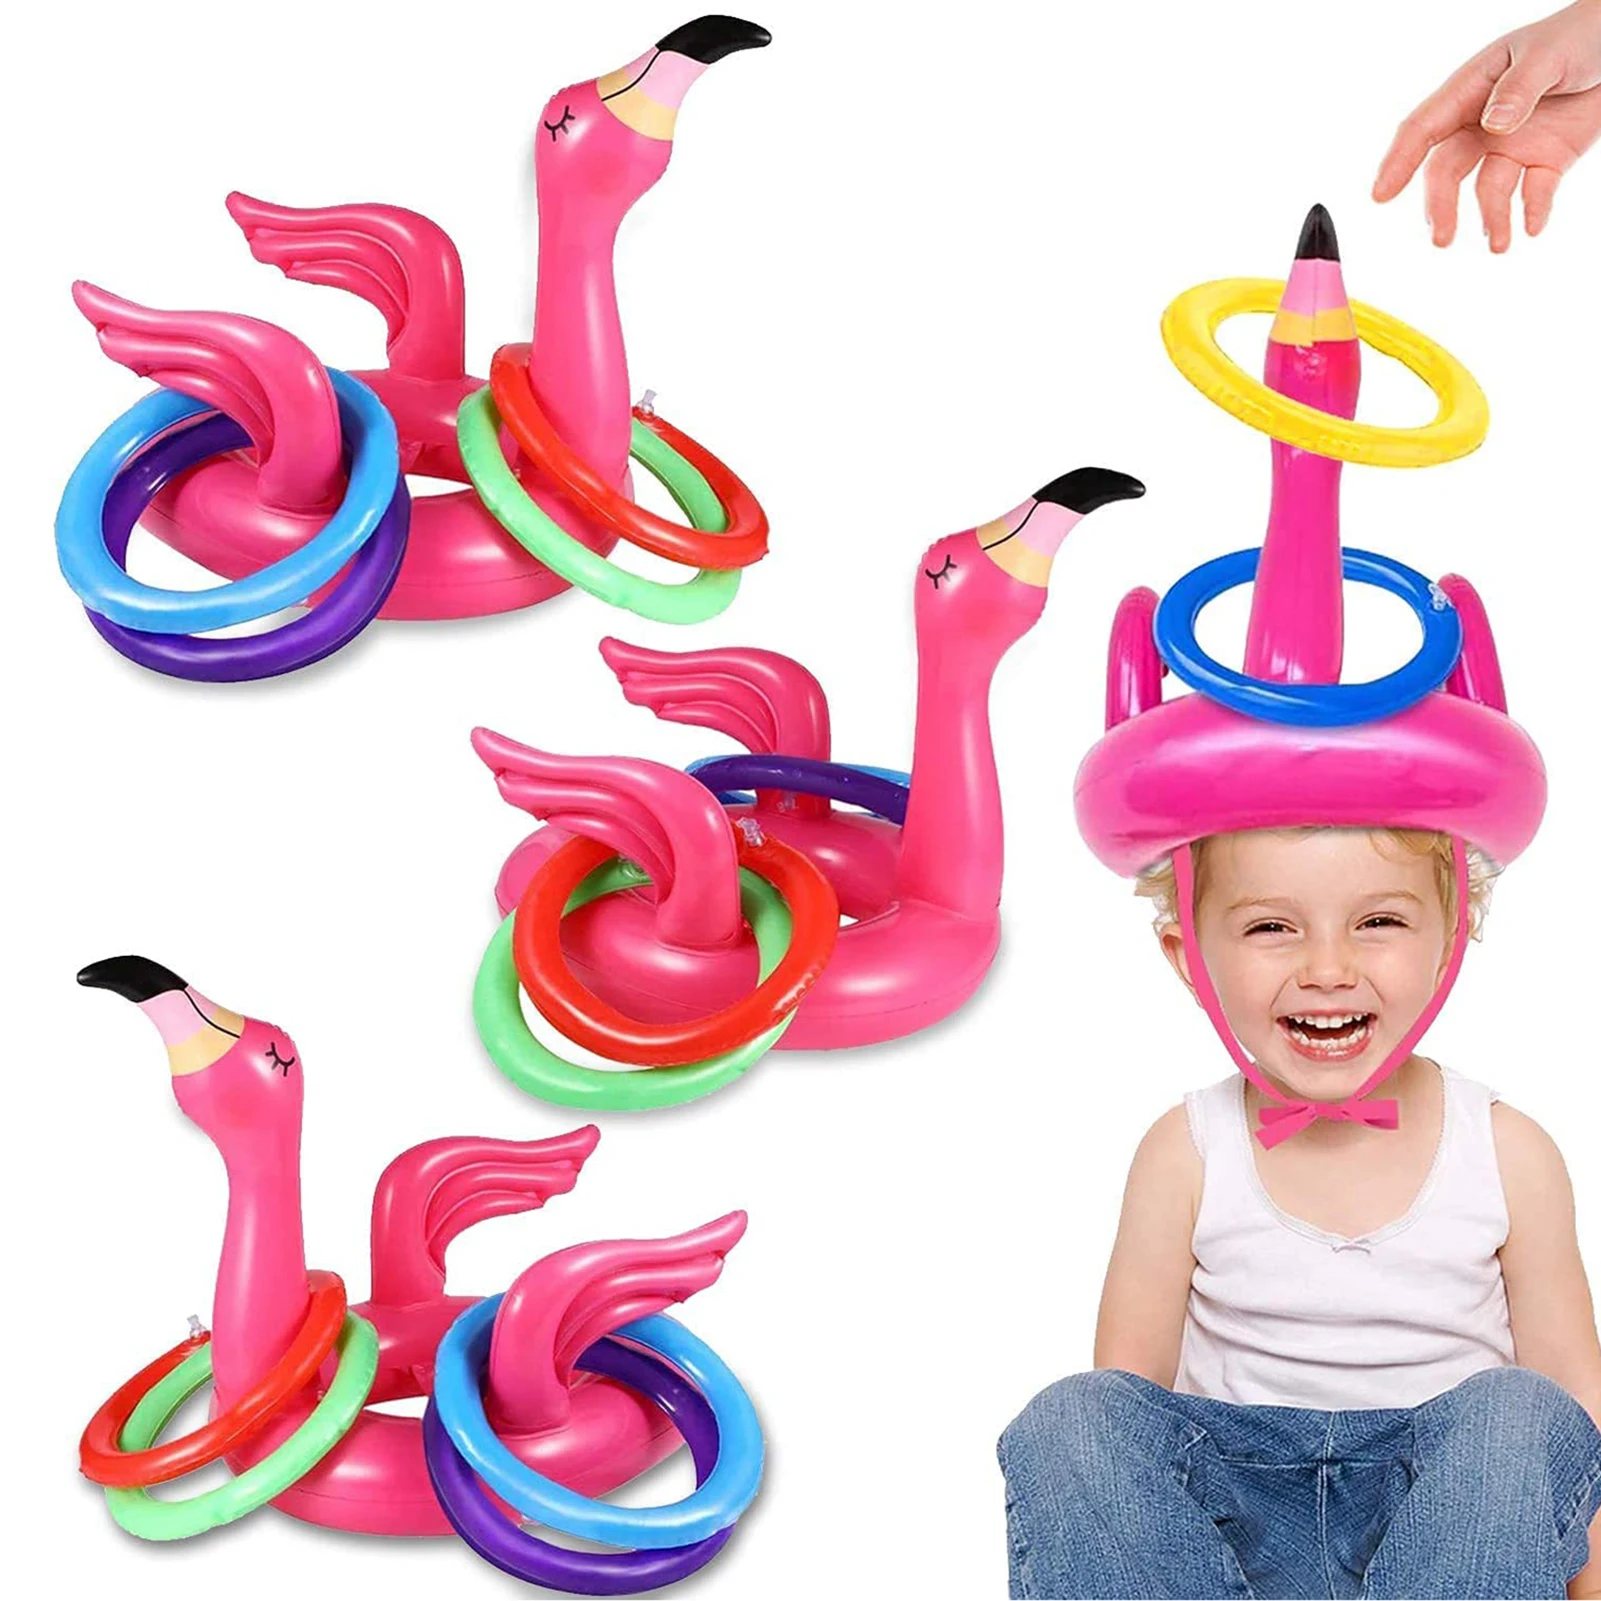 Portable Iatable Flamingo Head Hat With 4Pcs Toss Rings Water Game For Family Party Pink PVC Material Outdoor Pools Fun Toys key rings titanium alloy keychain for car keys wholesale bulk outdoor portable mini keyring for men and women